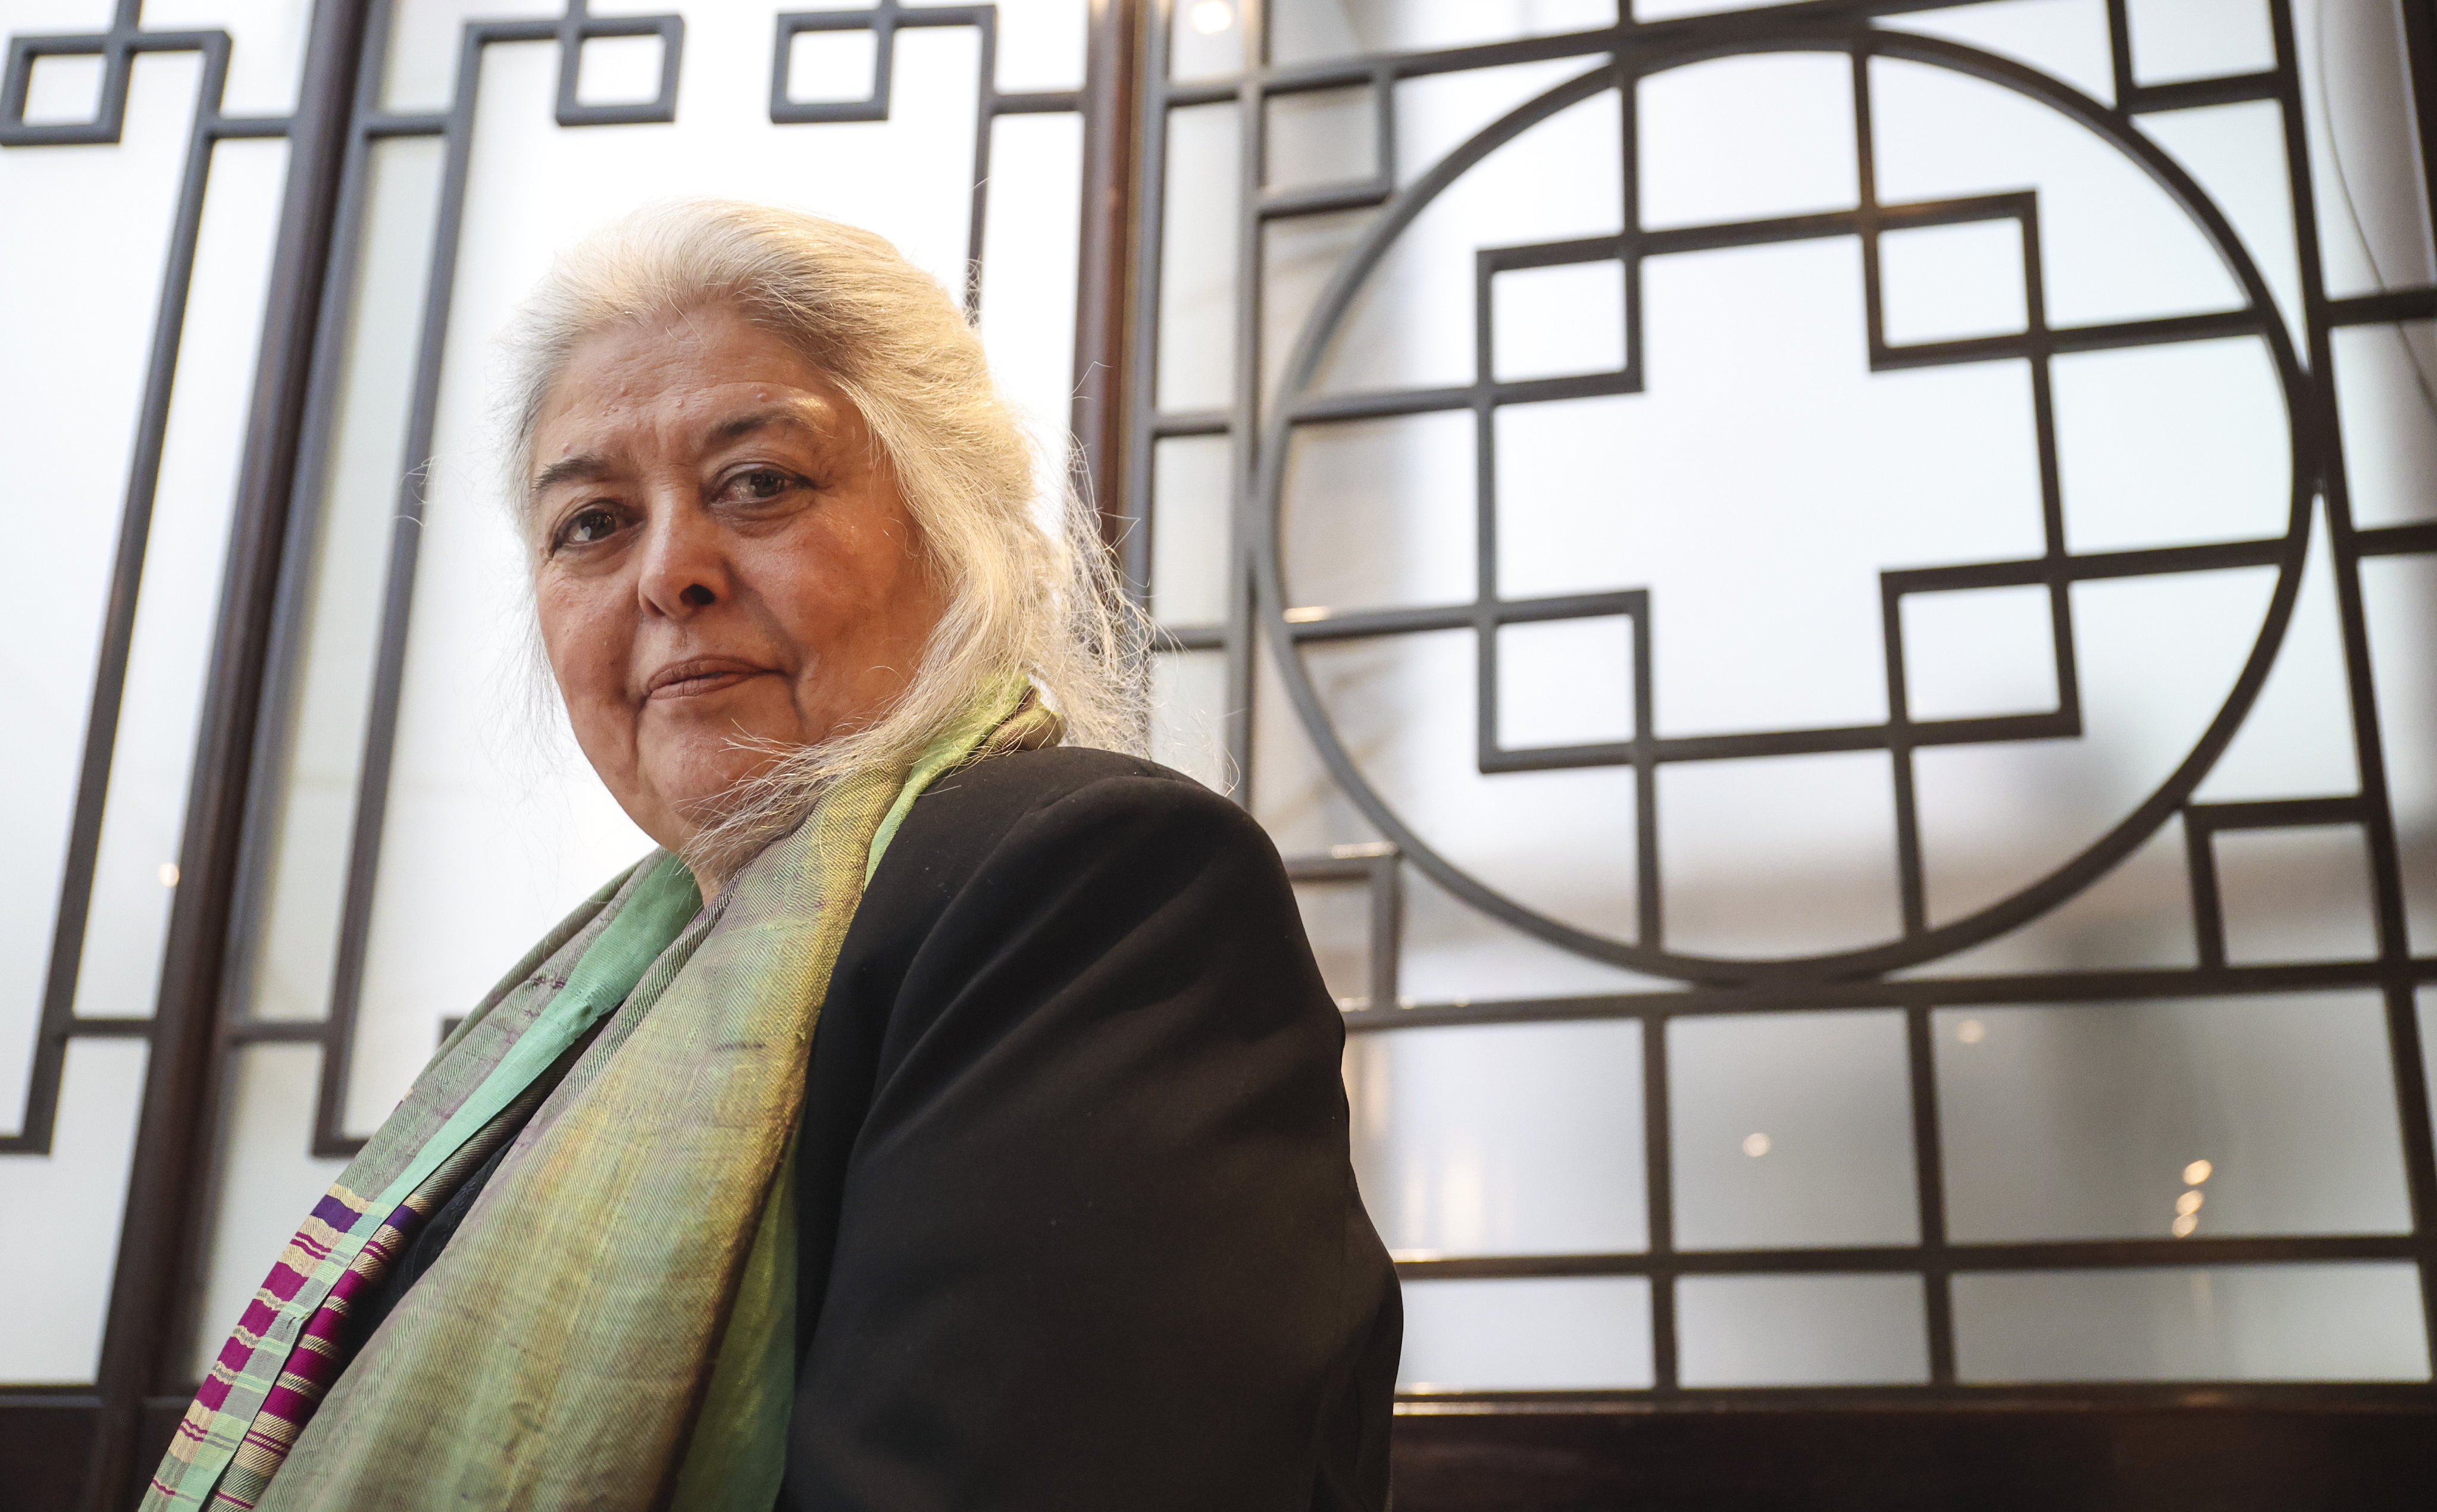 Mahbouba Seraj, Afghan women’s rights activist and a 2023 Nobel Peace Prize nominee, at the Hong Kong Foreign Correspondents Club. She intends to return to Taleban-ruled Afghanistan to renew the fight for women’s rights. Photo: Edmond So